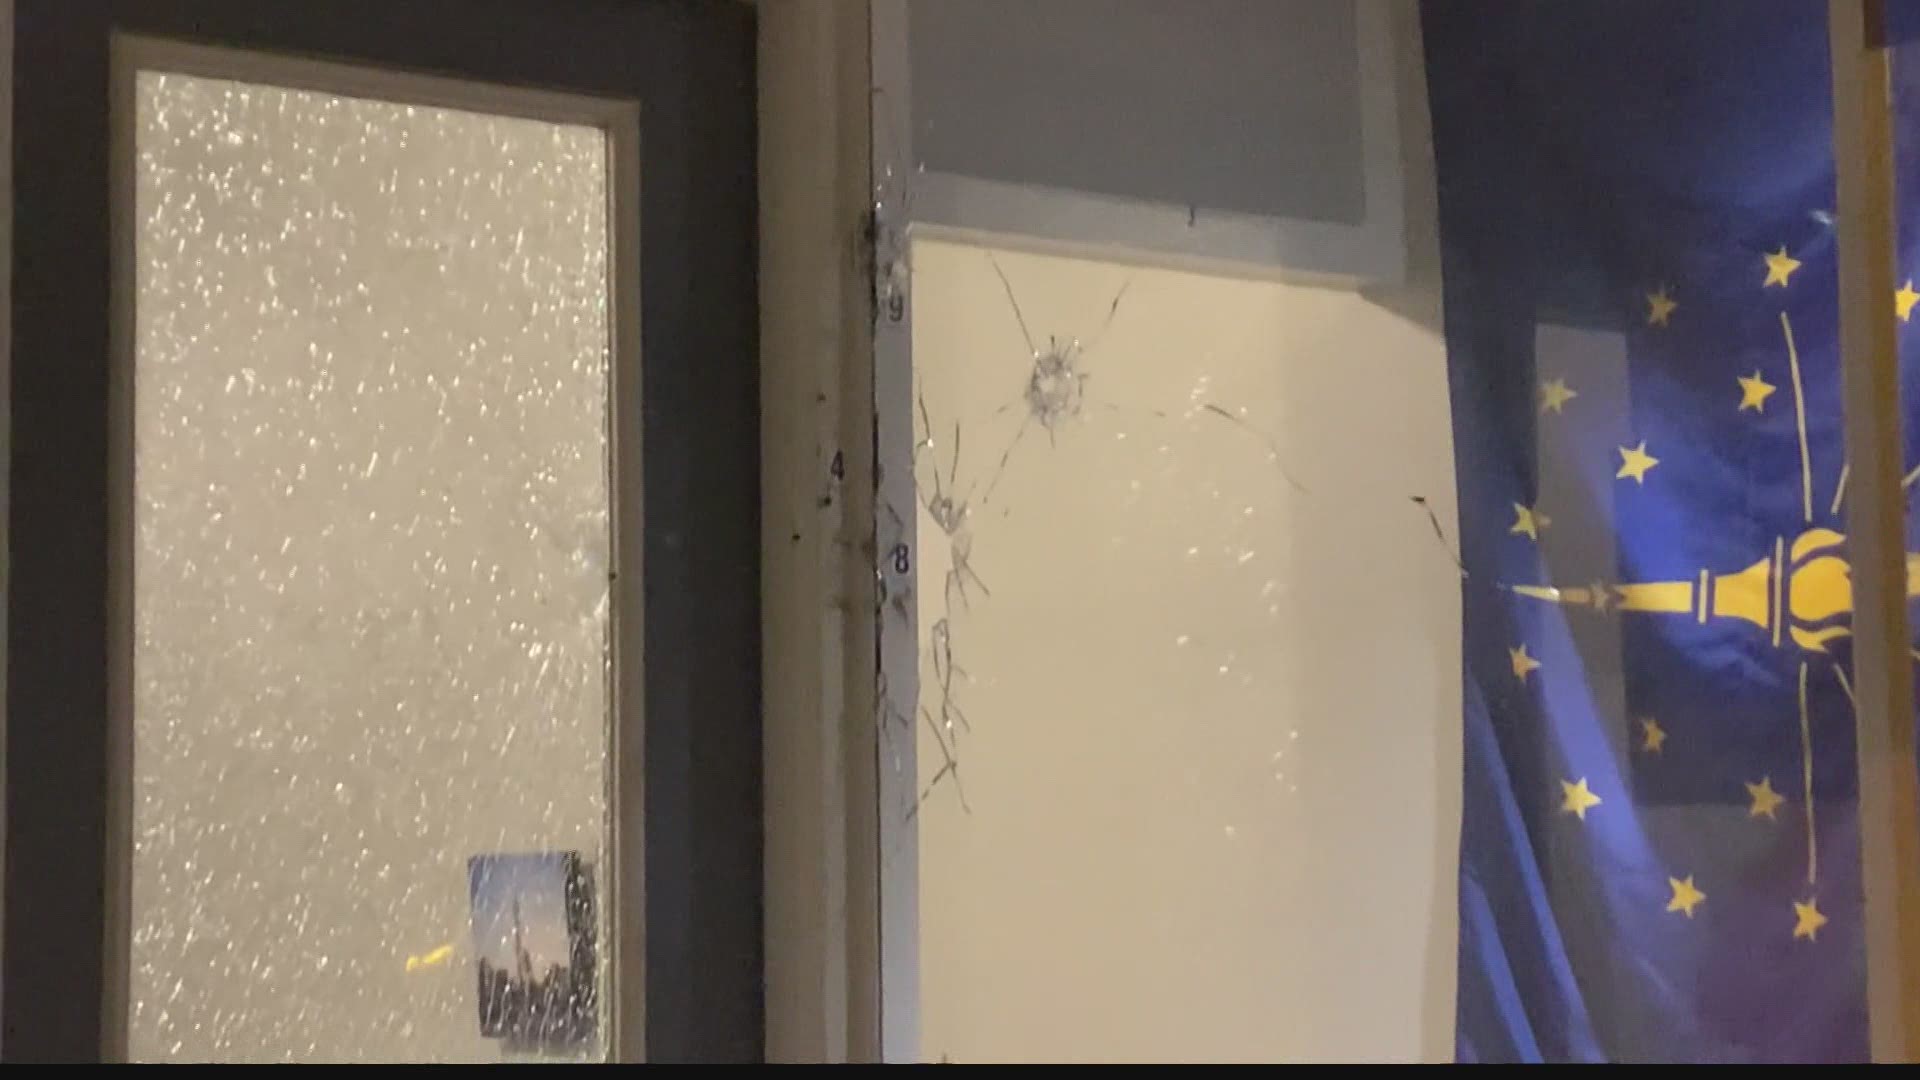 Police are investigating after several shots were fired into the Democratic Headquarters in Lafayette.